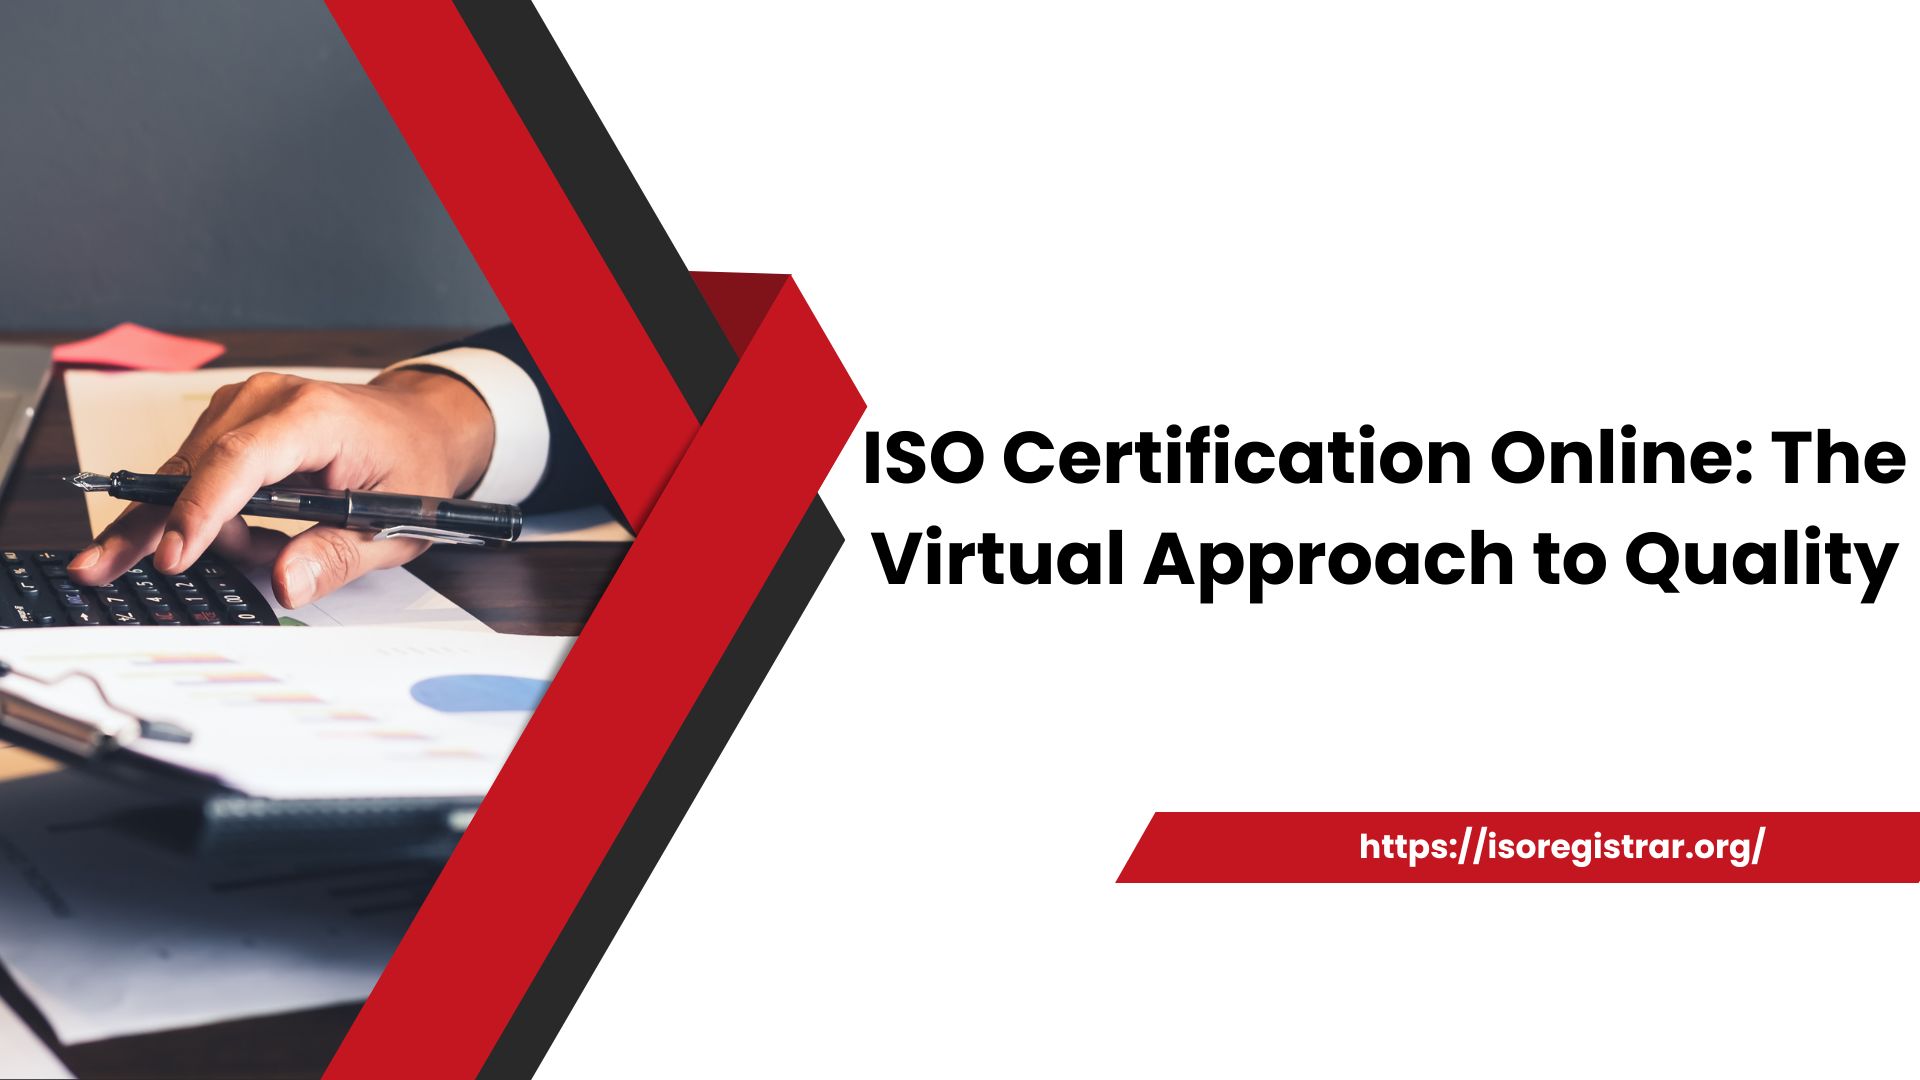 ISO Certification Online: The Virtual Approach to Quality